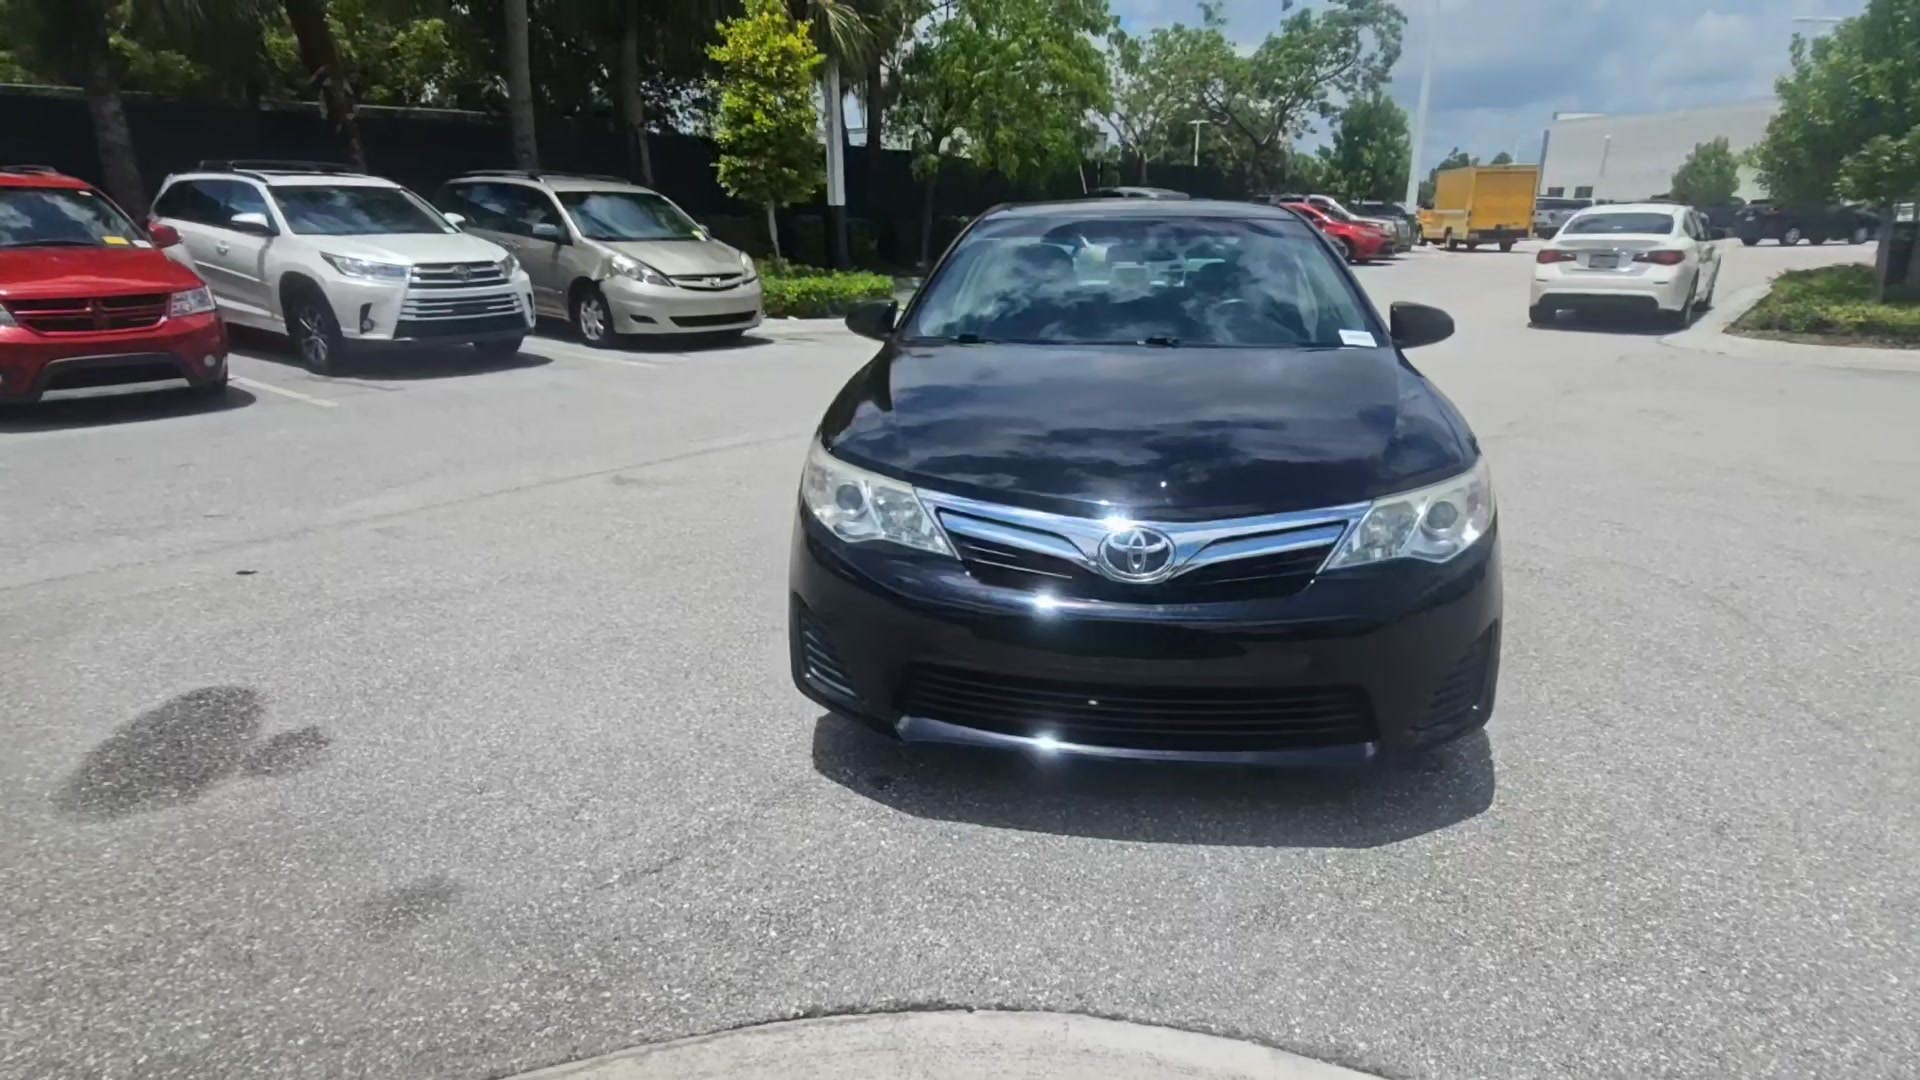 2012 Toyota Camry for sale in Gainesville FL 32609 by Veneauto Cars